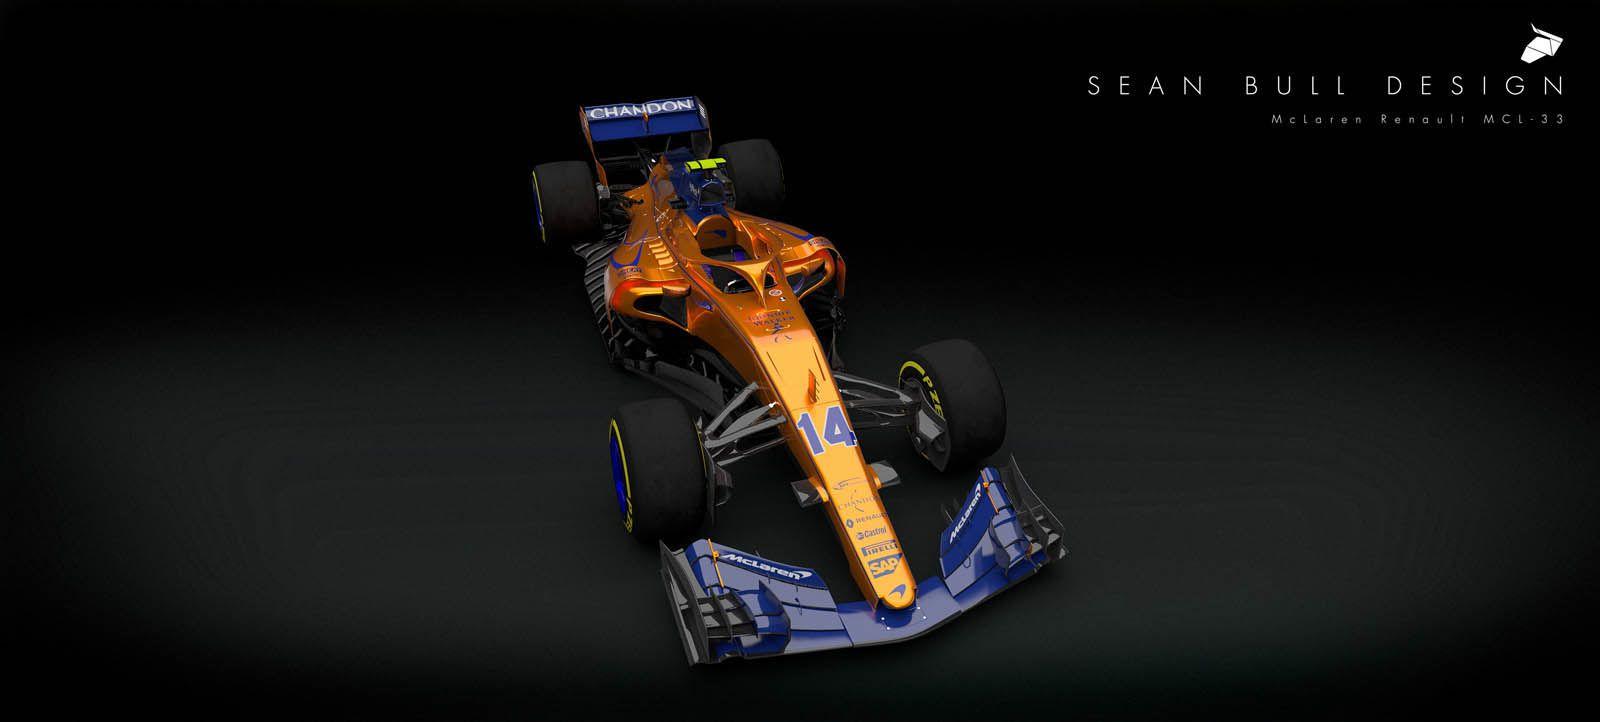 Maybe The 2018 McLaren Renault MCL33 Will Actually Win Something